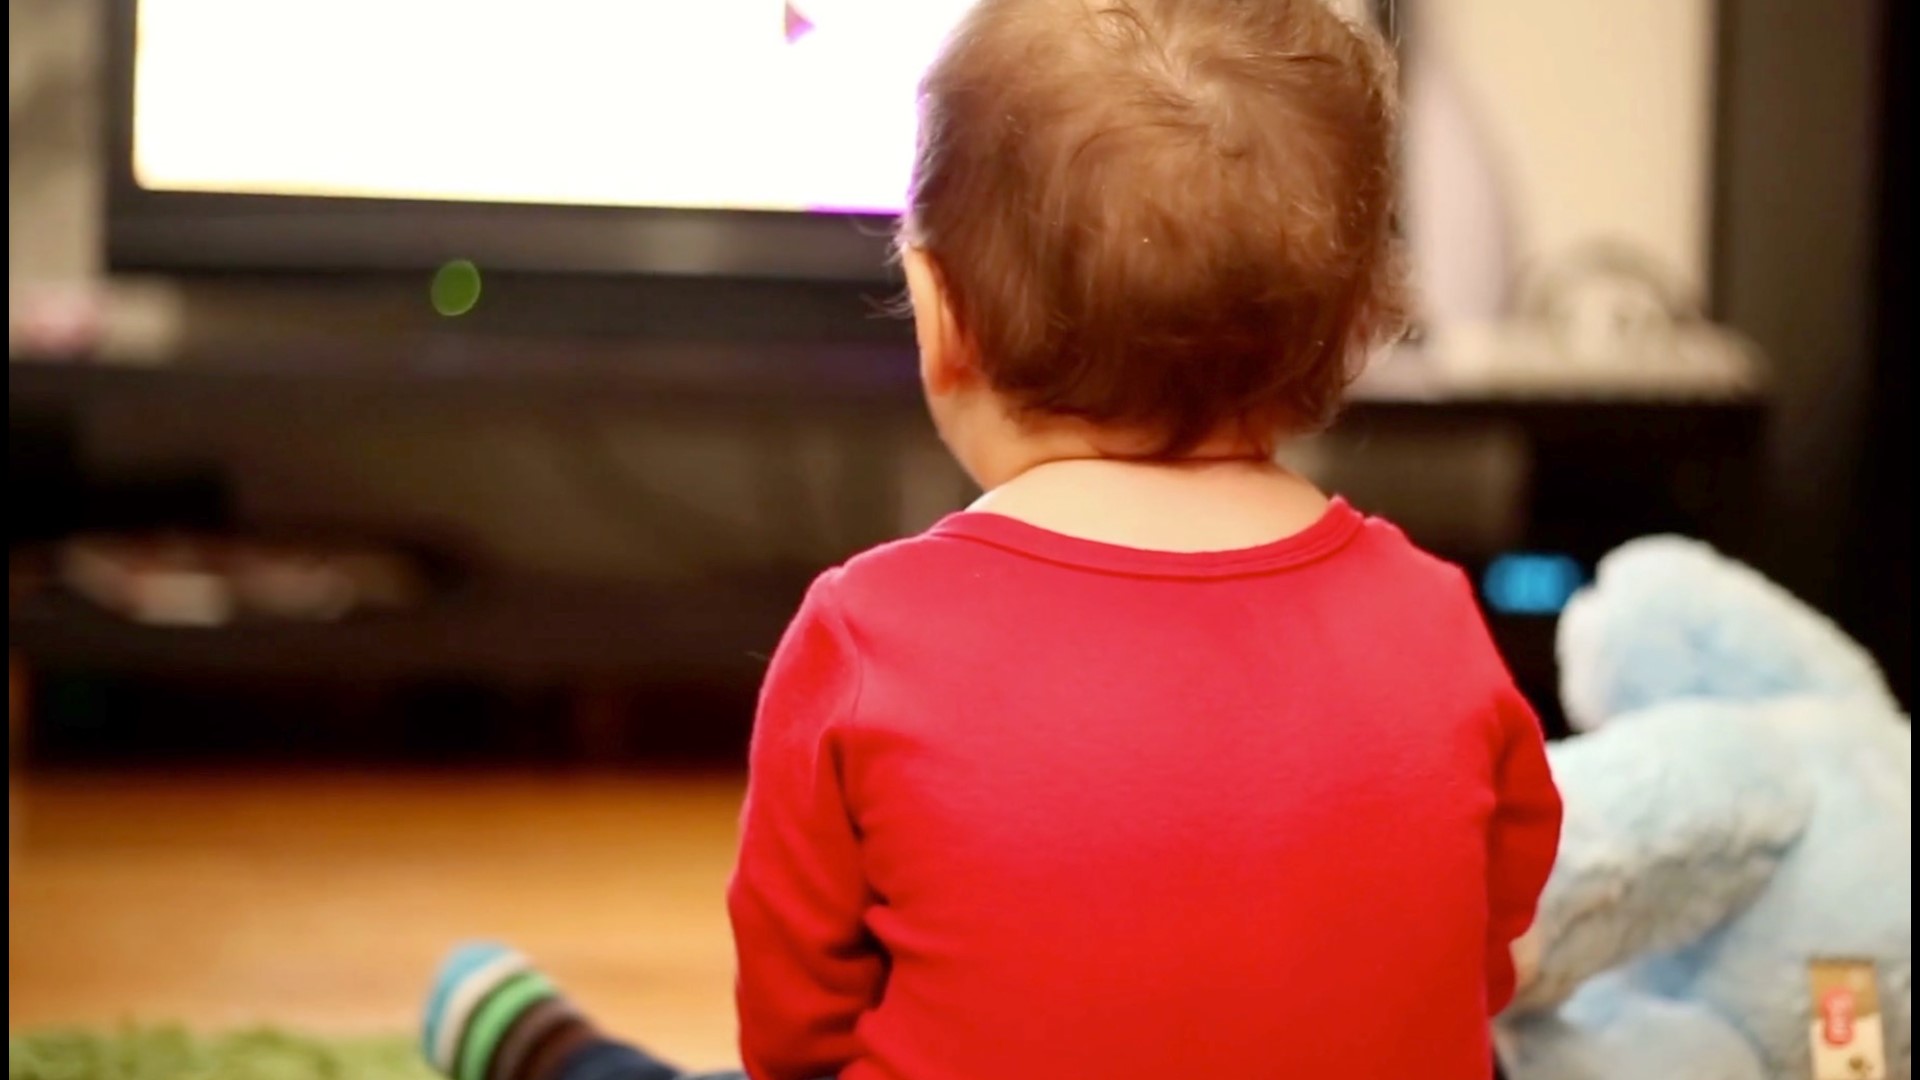 If you have a toddler, you are no doubt looking for a little break, why not turn to the TV for some help? Buzz60's Keri Lumm shares some movies your toddler will probably enjoy.